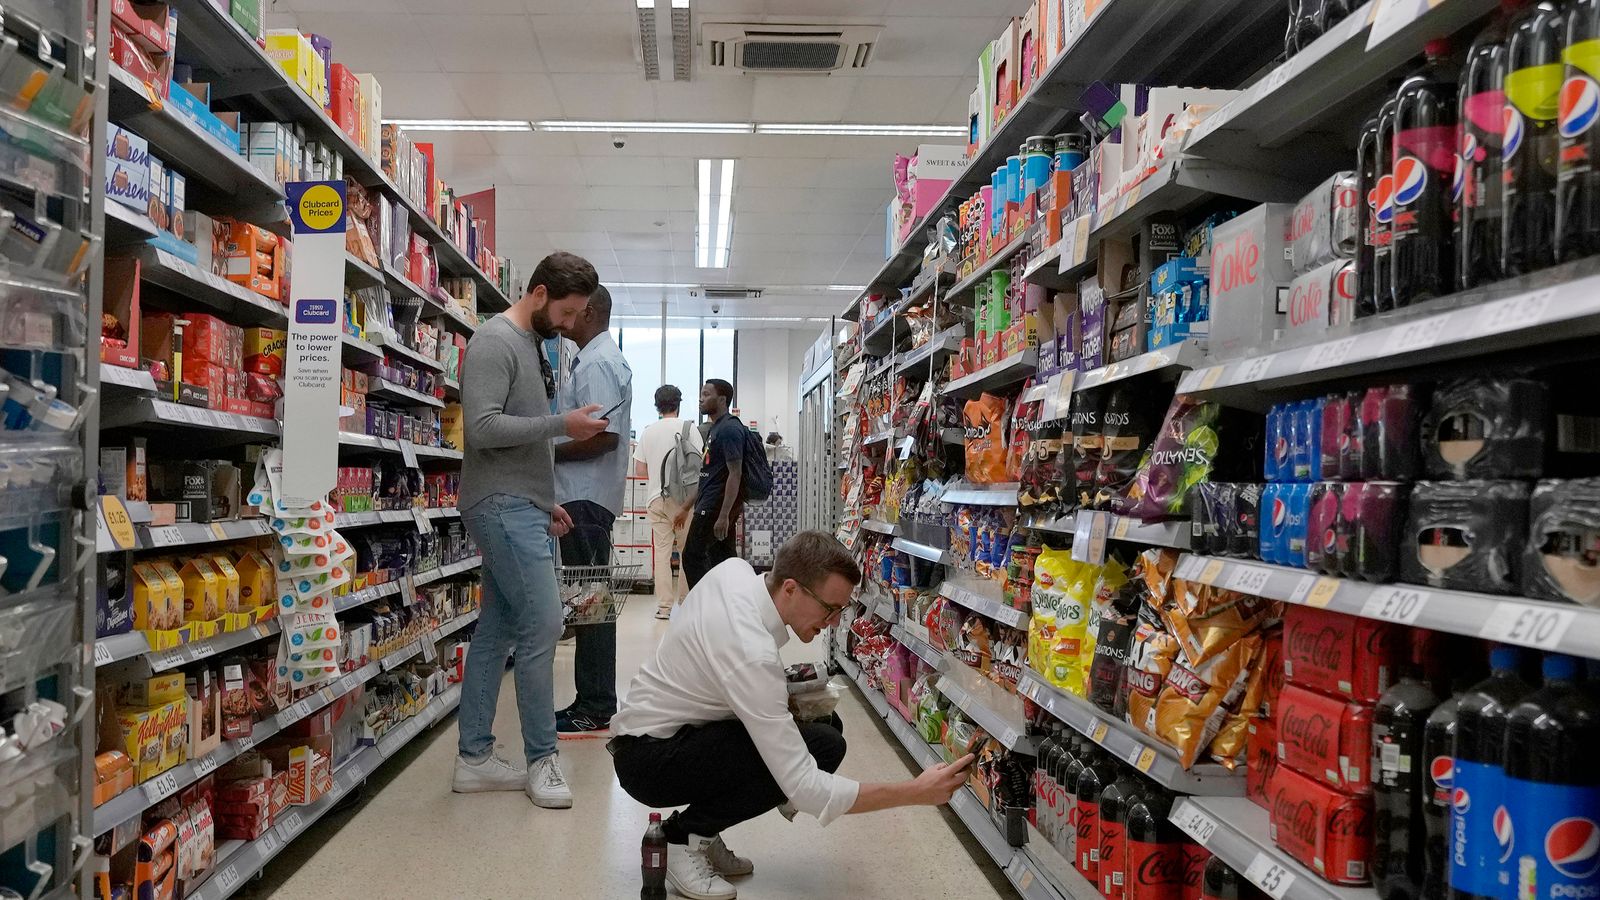 Food prices see month-on-month fall for first time in two years, British Retail Consortium says